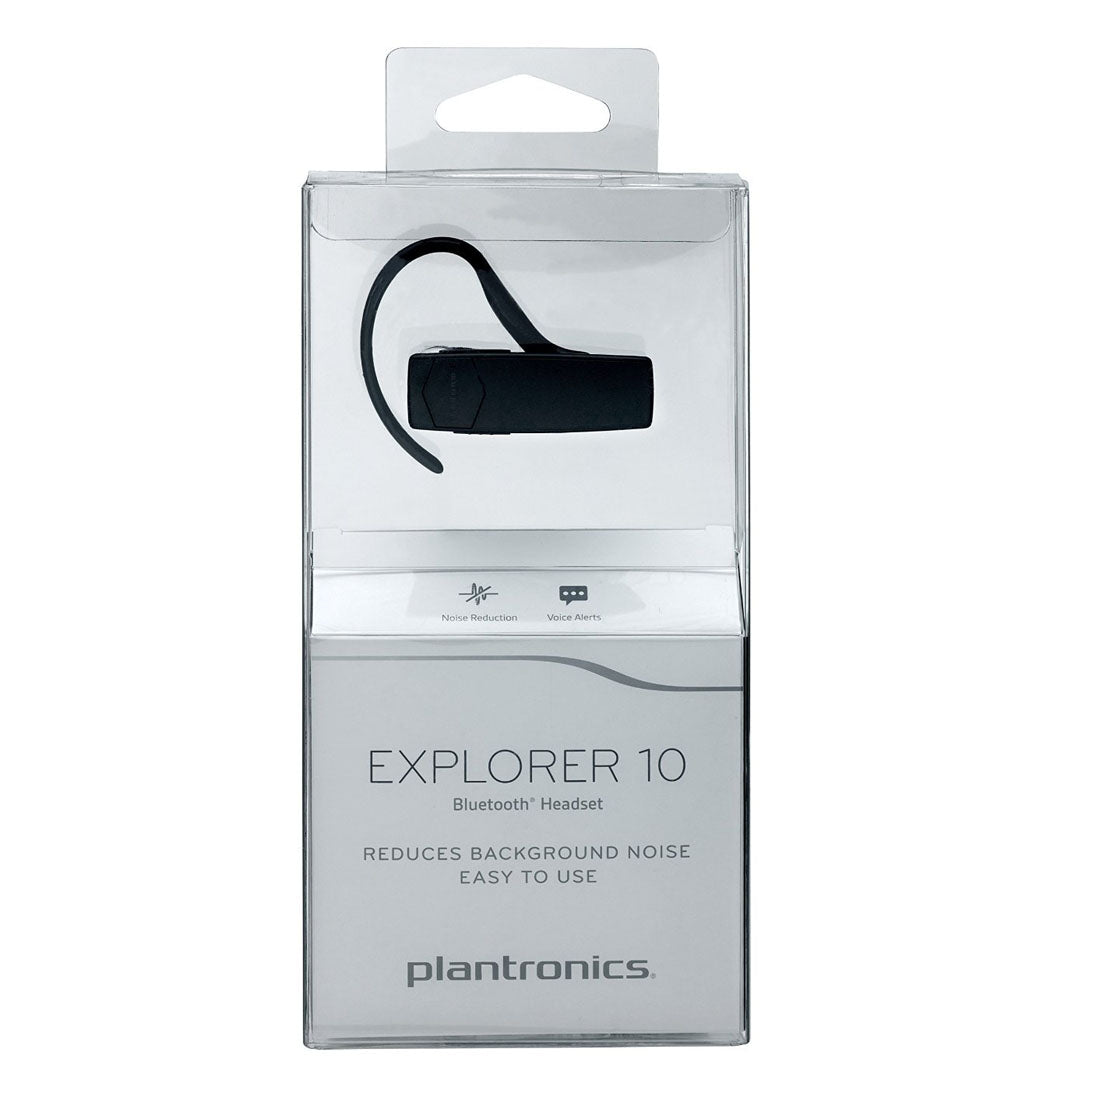 Plantronics Explorer 10 Bluetooth Headset with Noise Cancellation and Battery Backup up to 11 hours